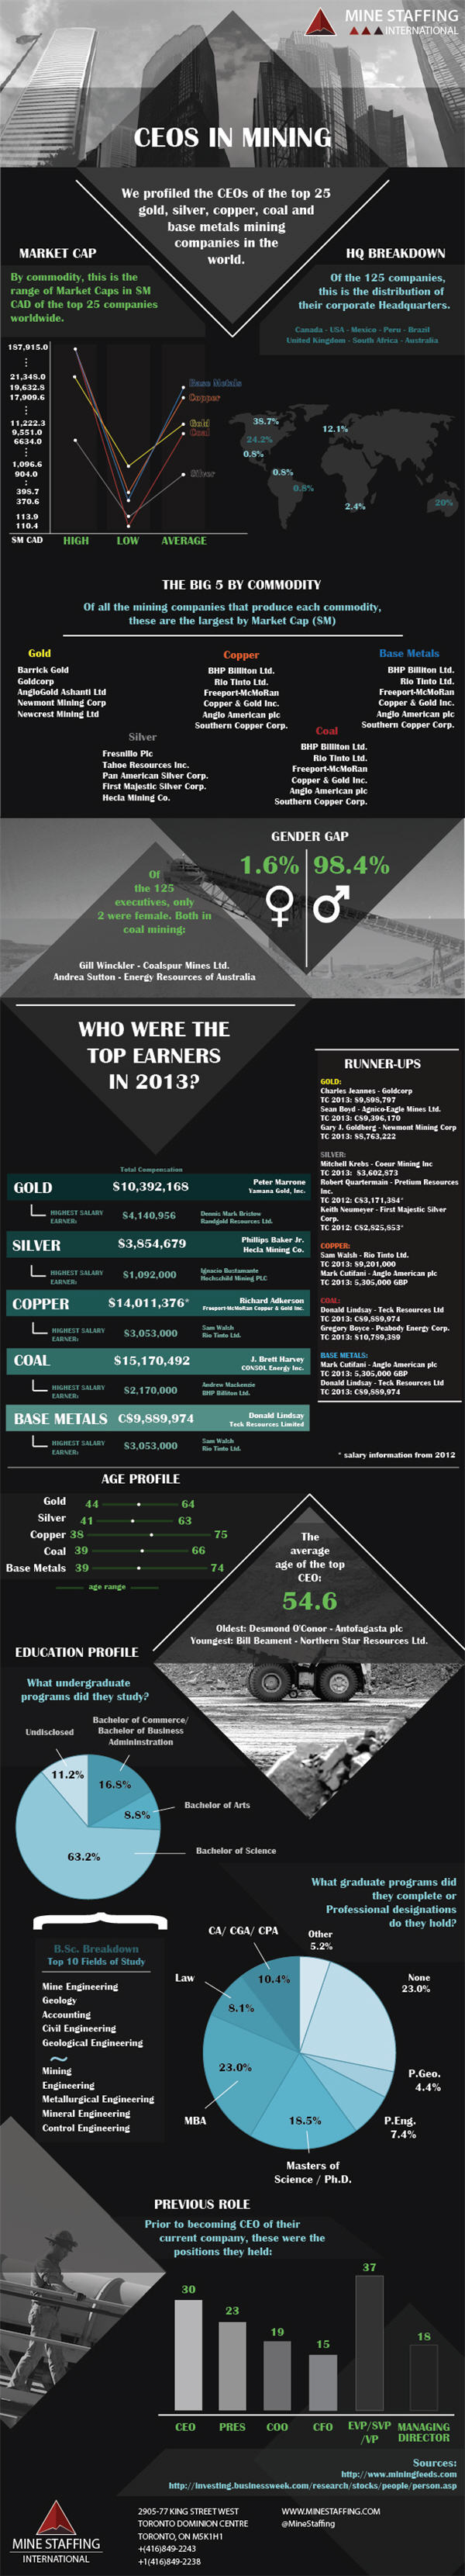 INFOGRAPHIC: Top mining CEOs - who earns what?